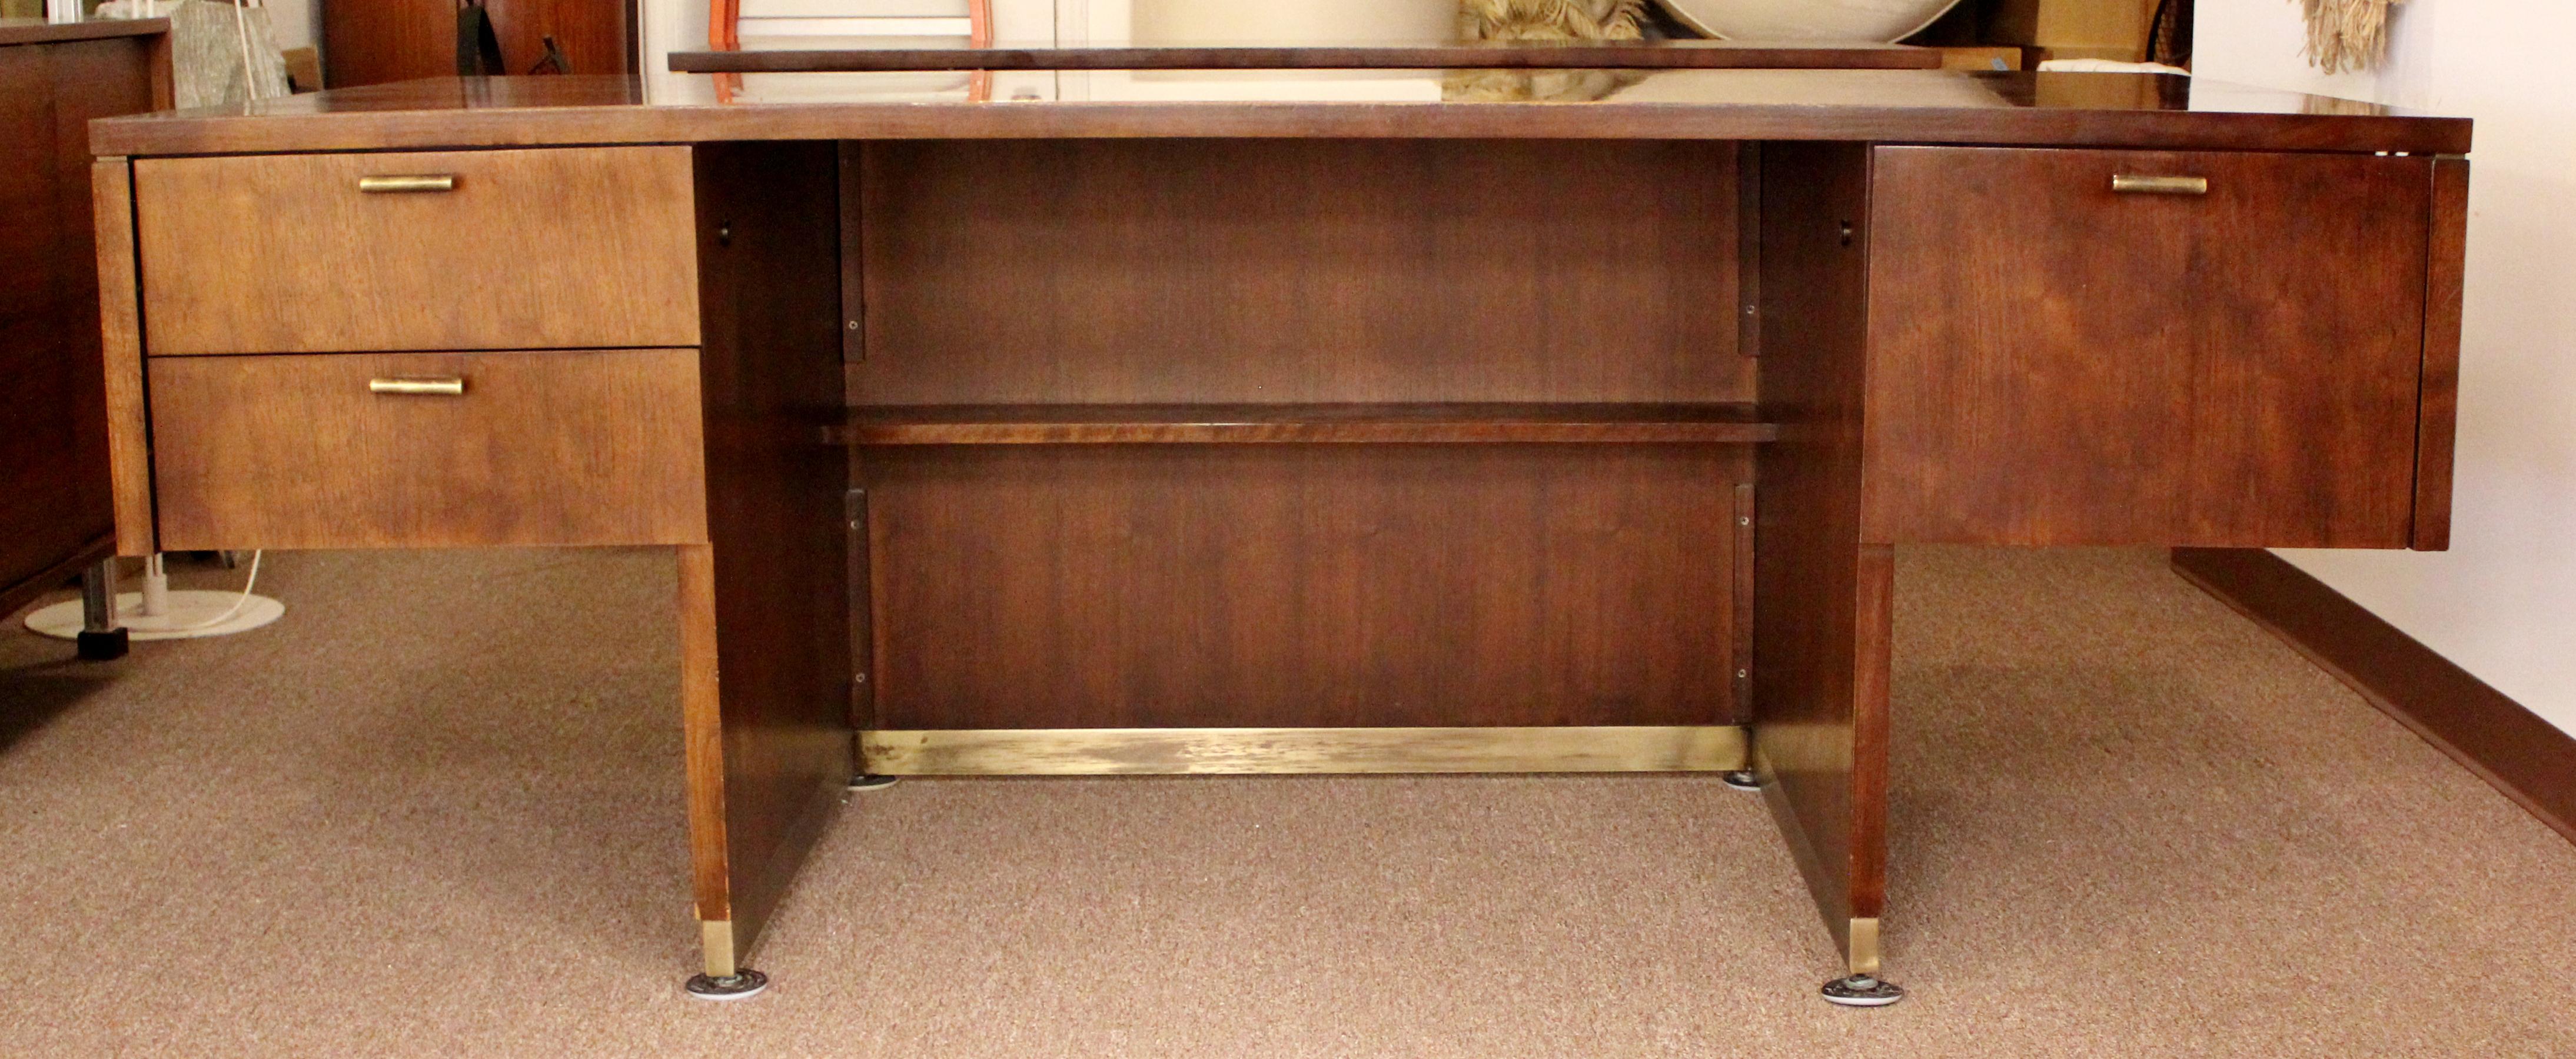 For your consideration is an incredible, executive cantilever desk and cabinet credenza set, made by Myrtle Desk, both with brass accents, circa 1960s. Walnut body of the desk is an open pedestal base with recessed shelf and brass inlay. The drawers